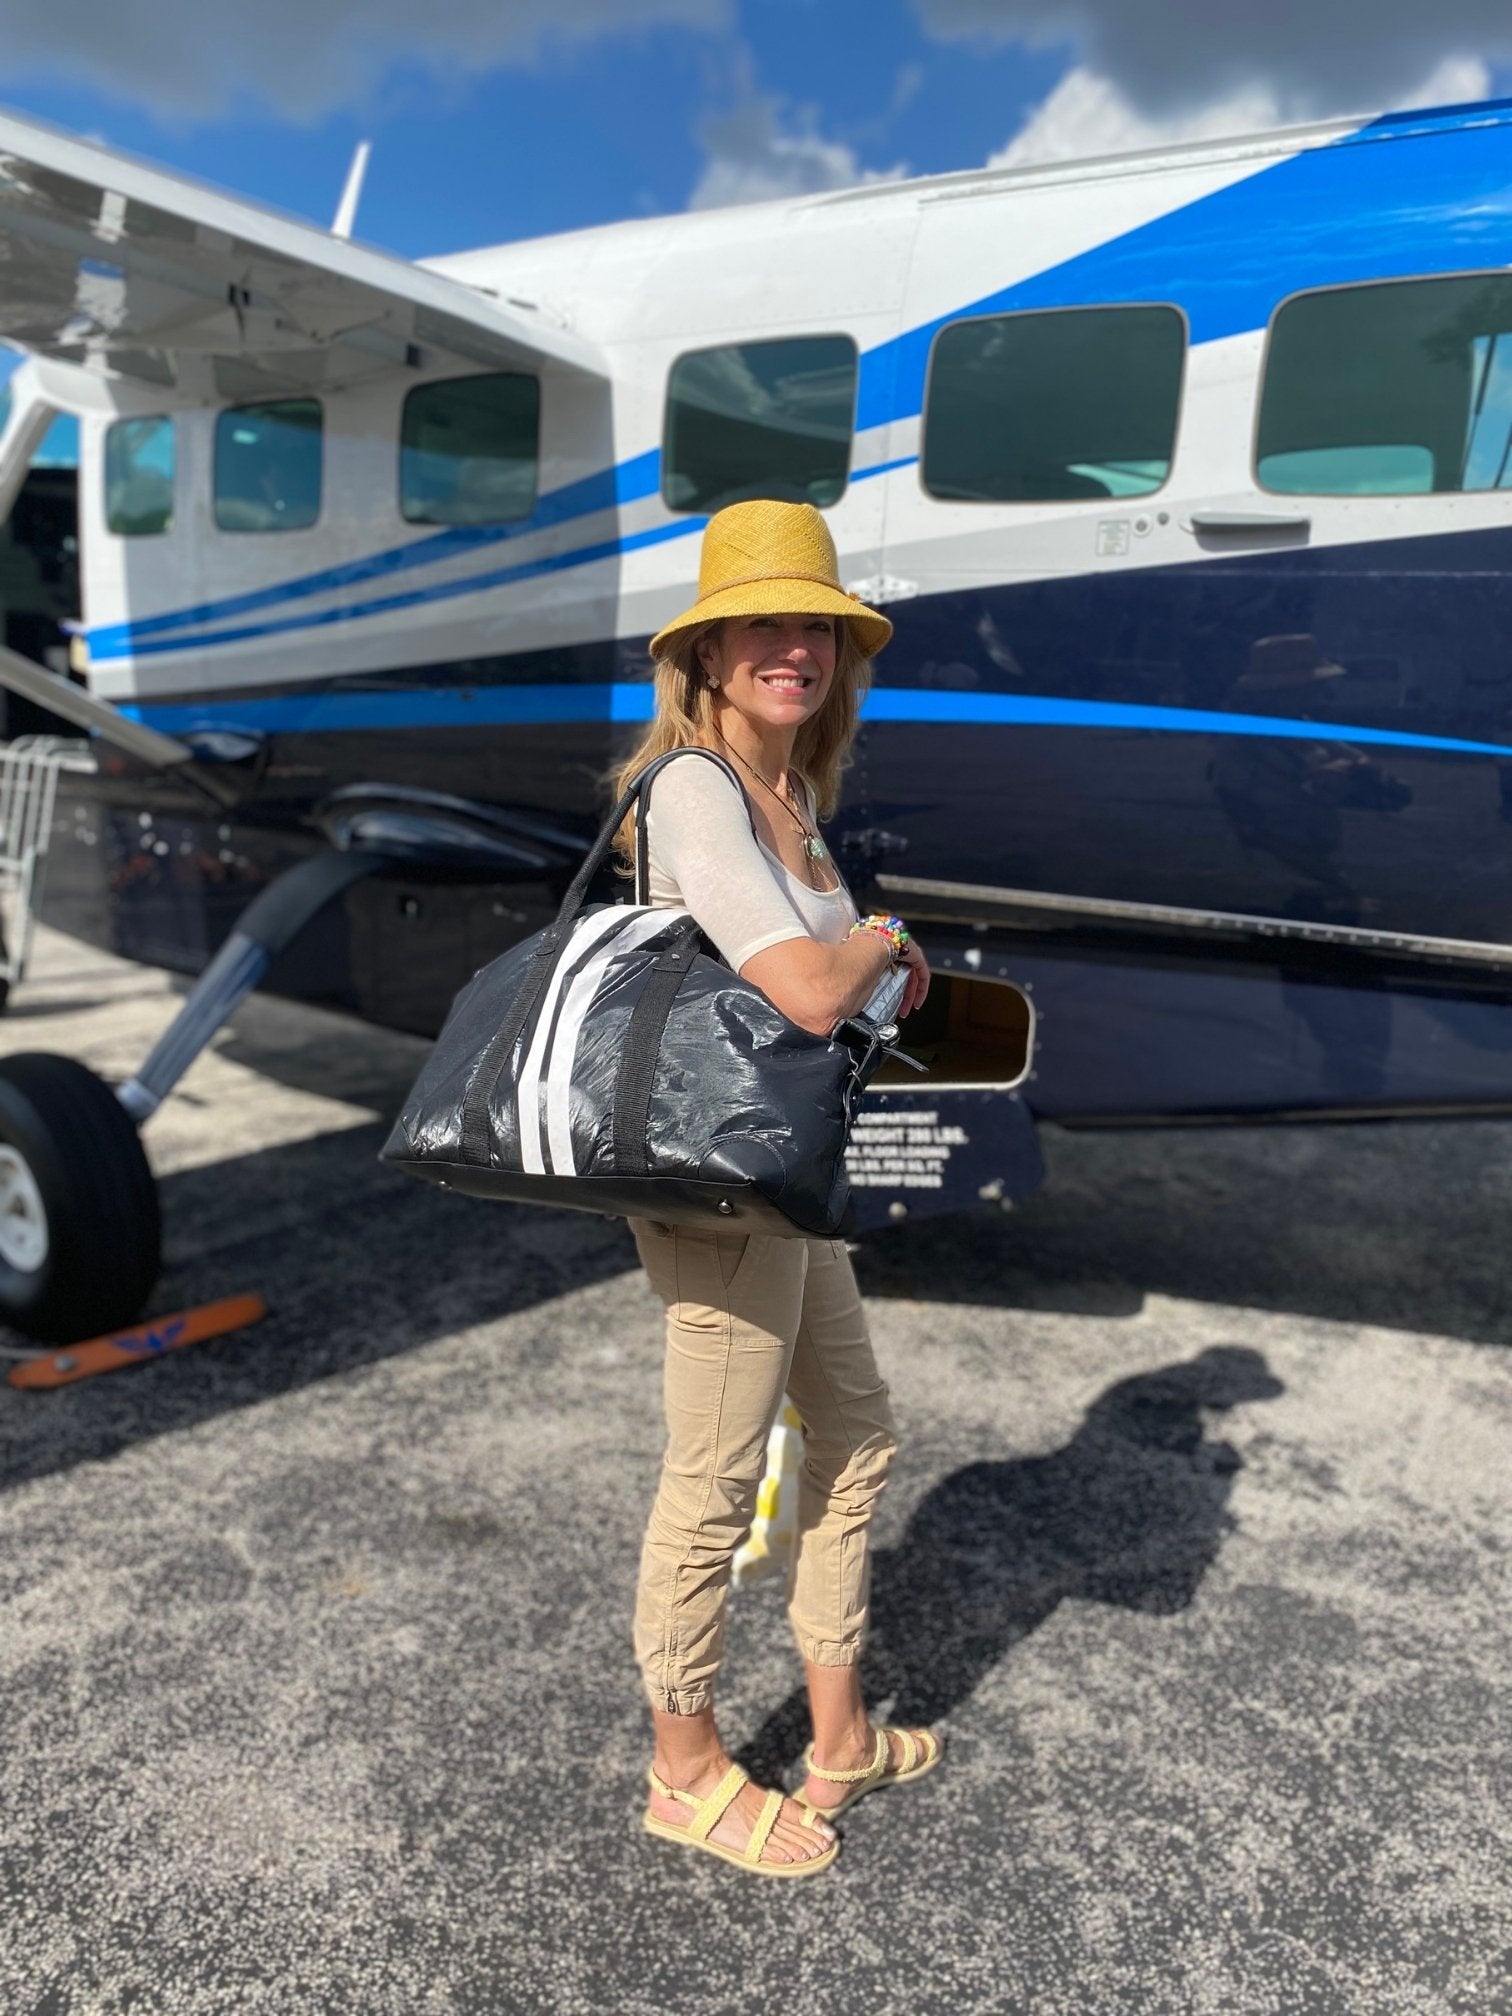 Woman standing in front of small plane with shimmer black weekender bag